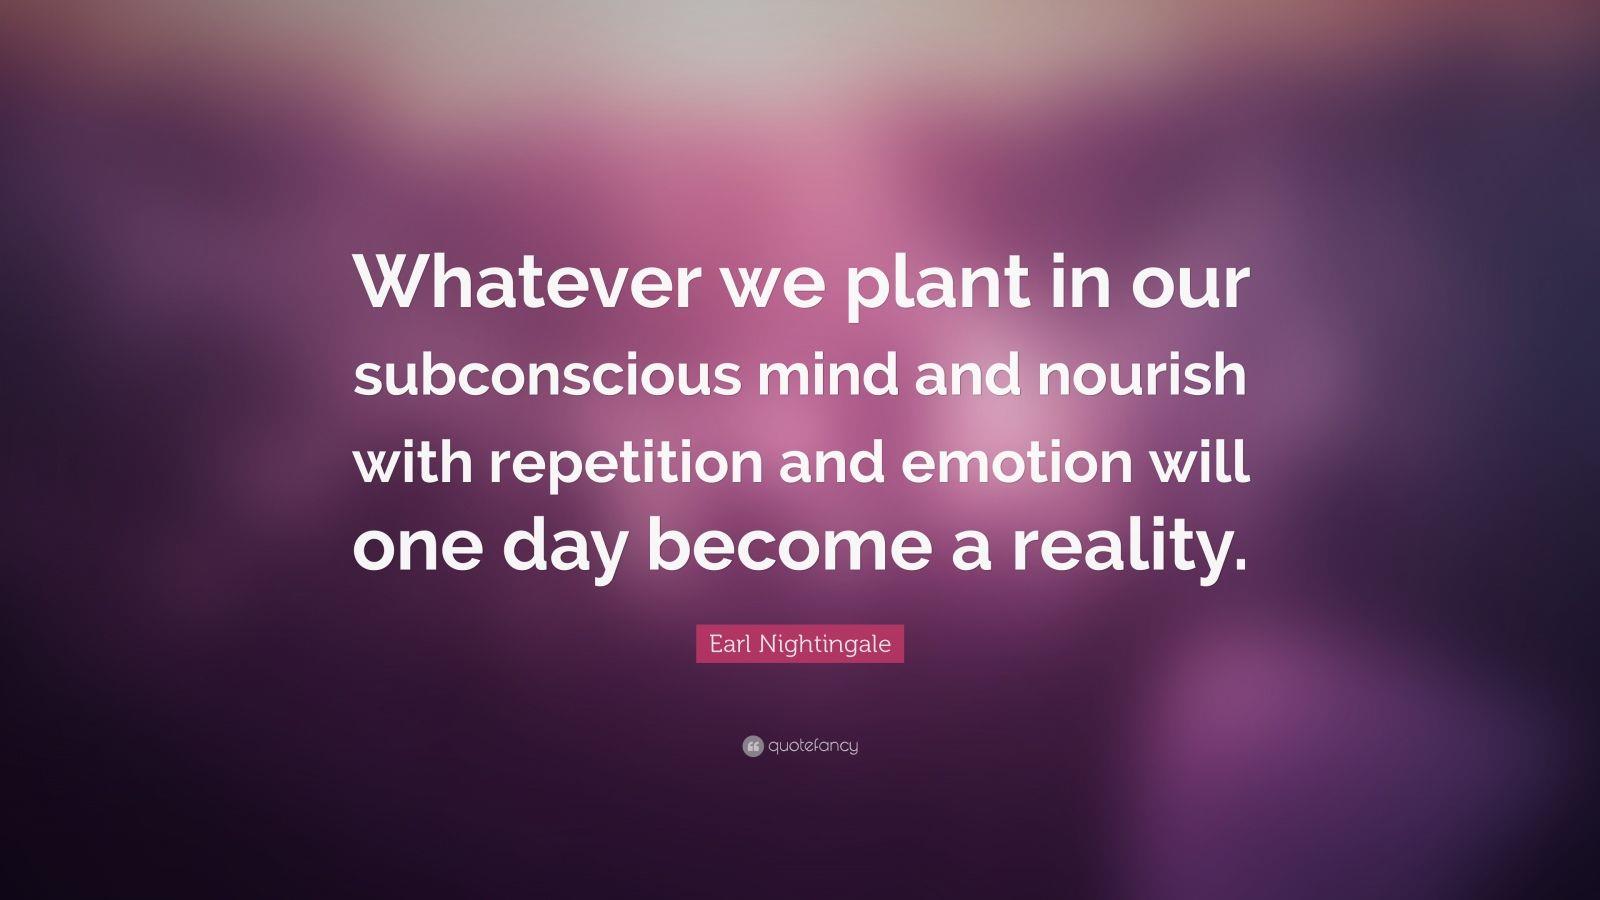 "Whatever we plant in our subconscious mind and nourish...